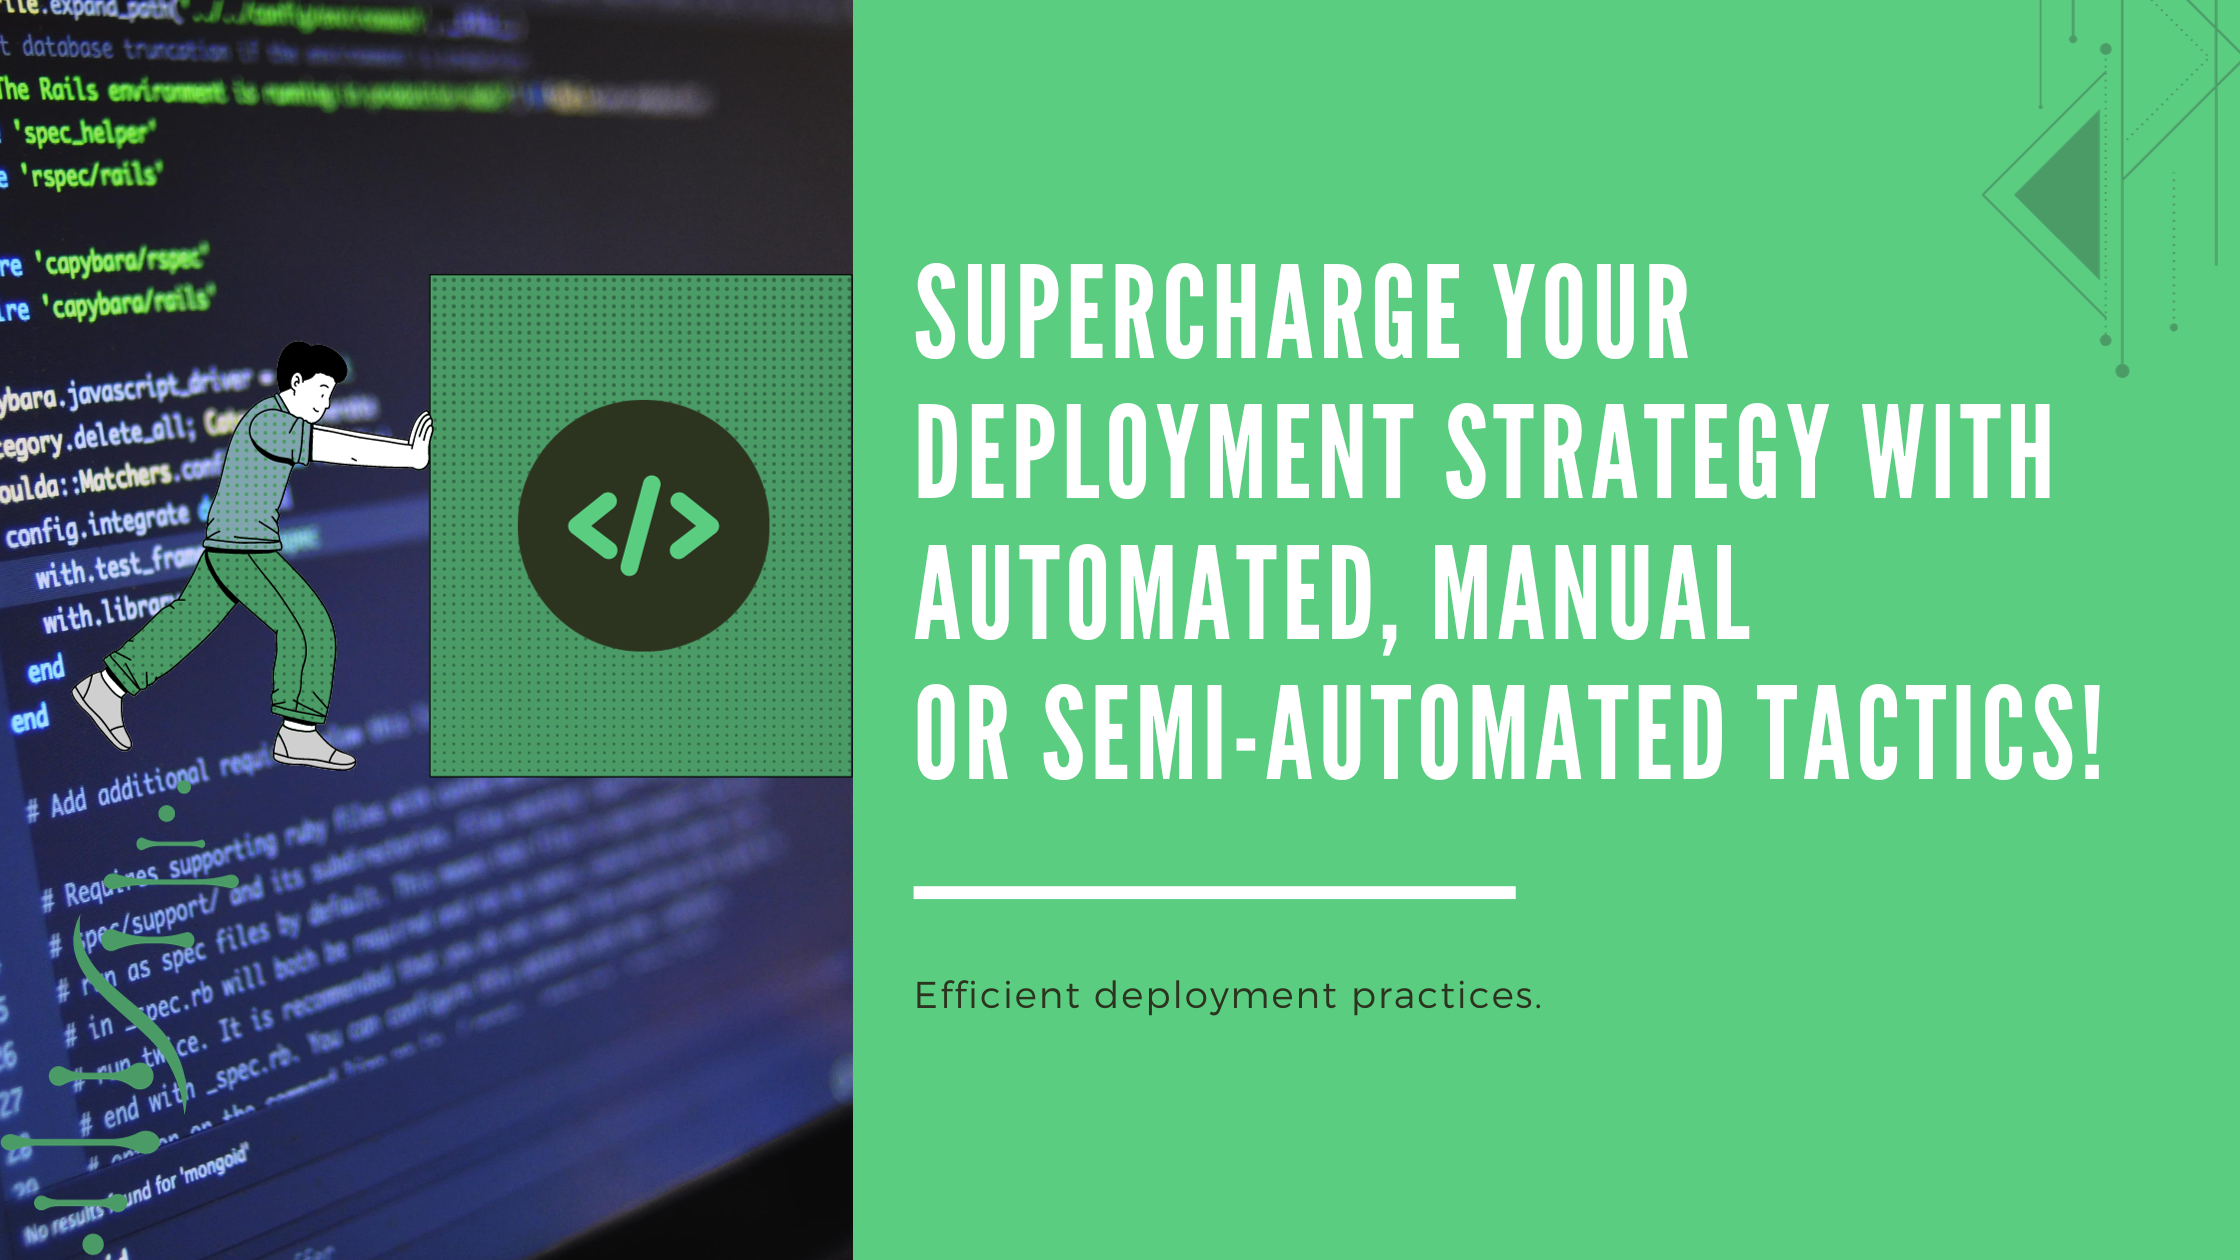 Supercharge-Your-Deployment-Strategy-with-Automated-Manual-or-Semi-Automated-Tactics